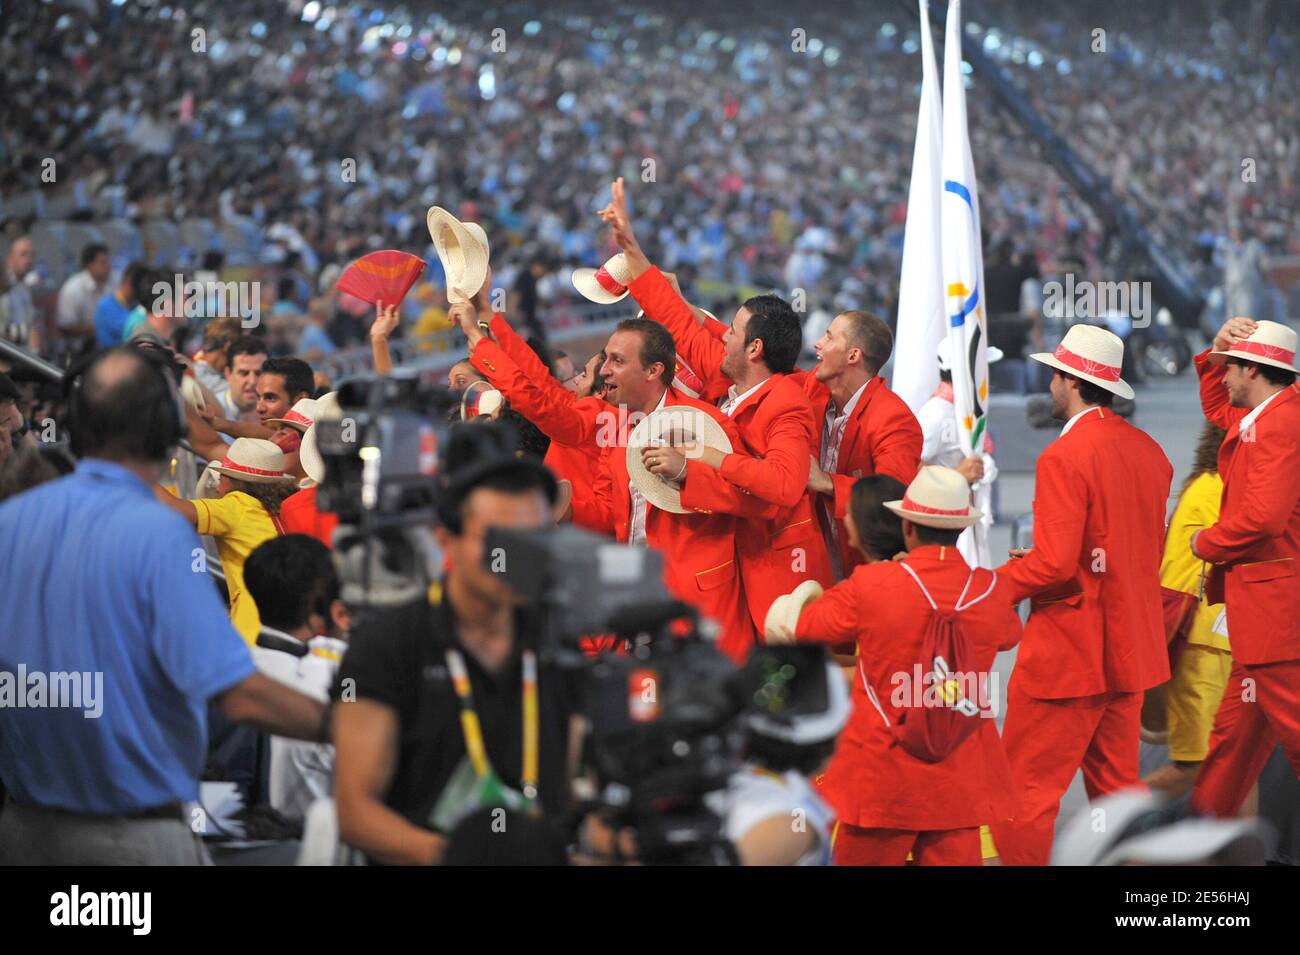 The Spanish delegation during the Opening Ceremony for the 2008 Beijing Summer Olympics at the National Stadium in Beijing, China on August 8, 2008. Photo by Jean-Michel Psaila/ABACAPRESS.COM Stock Photo